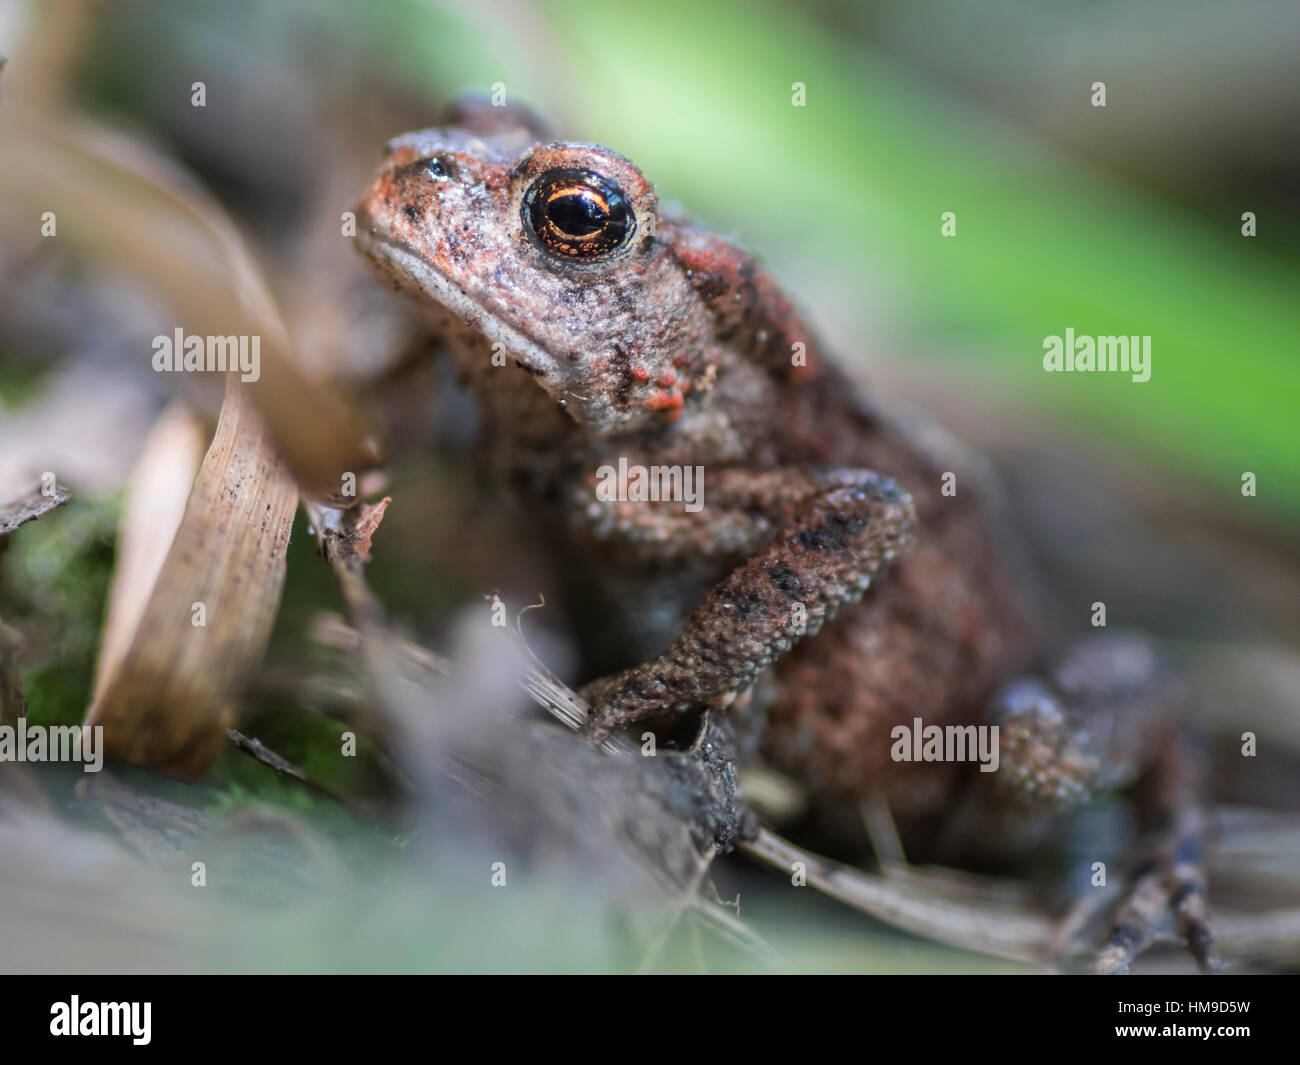 Juvenile toad in Gosforth Park Nature Reserve, North Tyneside, England Stock Photo